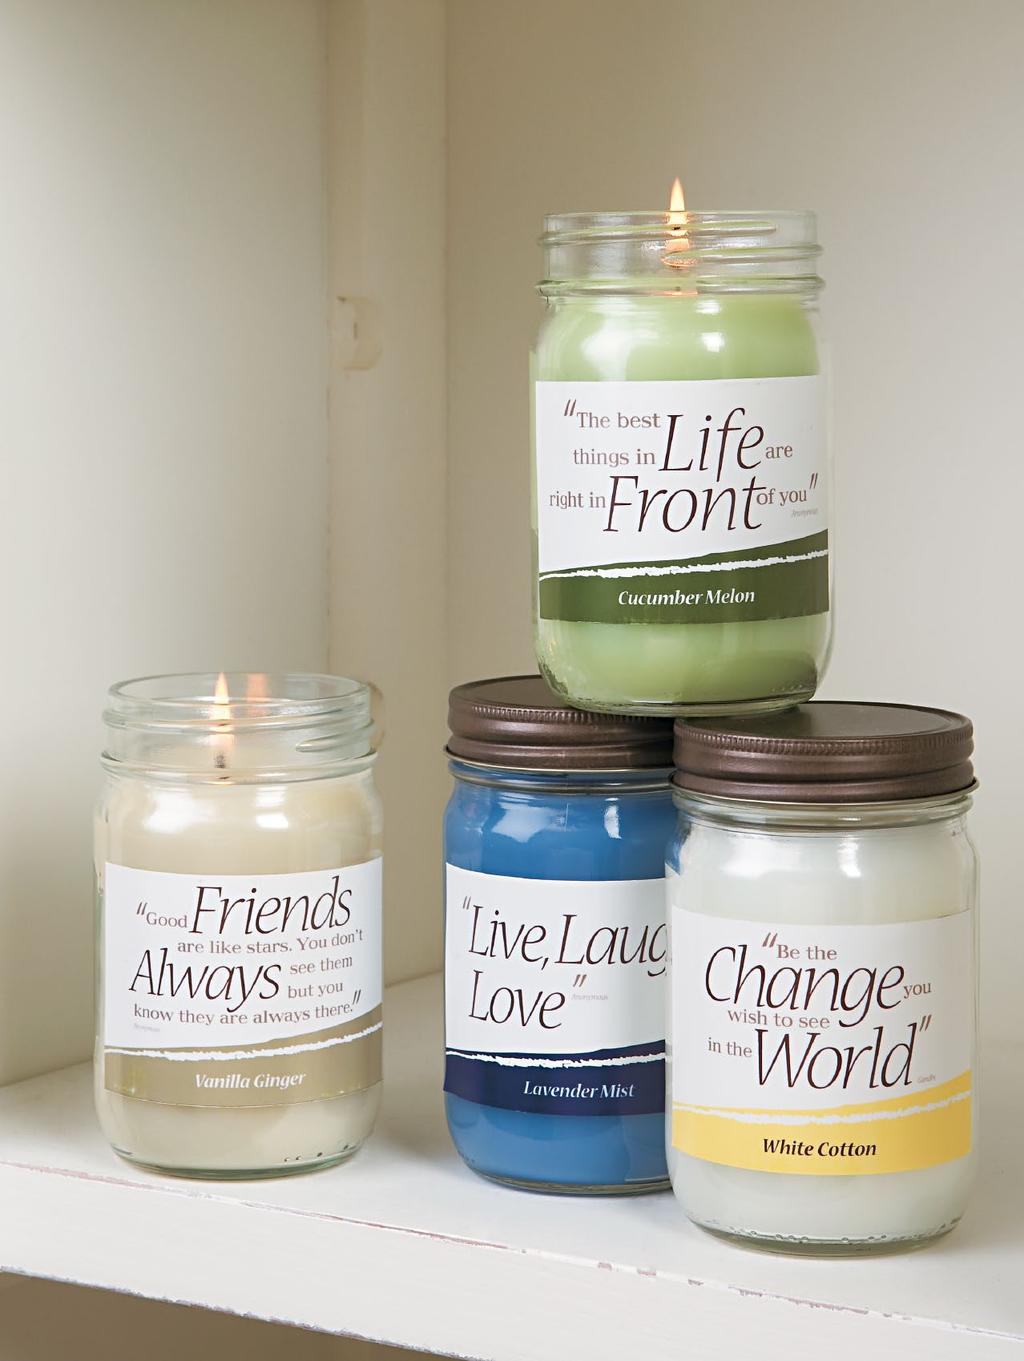 glow a warm Introducing Wax Poetic Candles! The fragrance rejuvenates, the sentiment inspires.